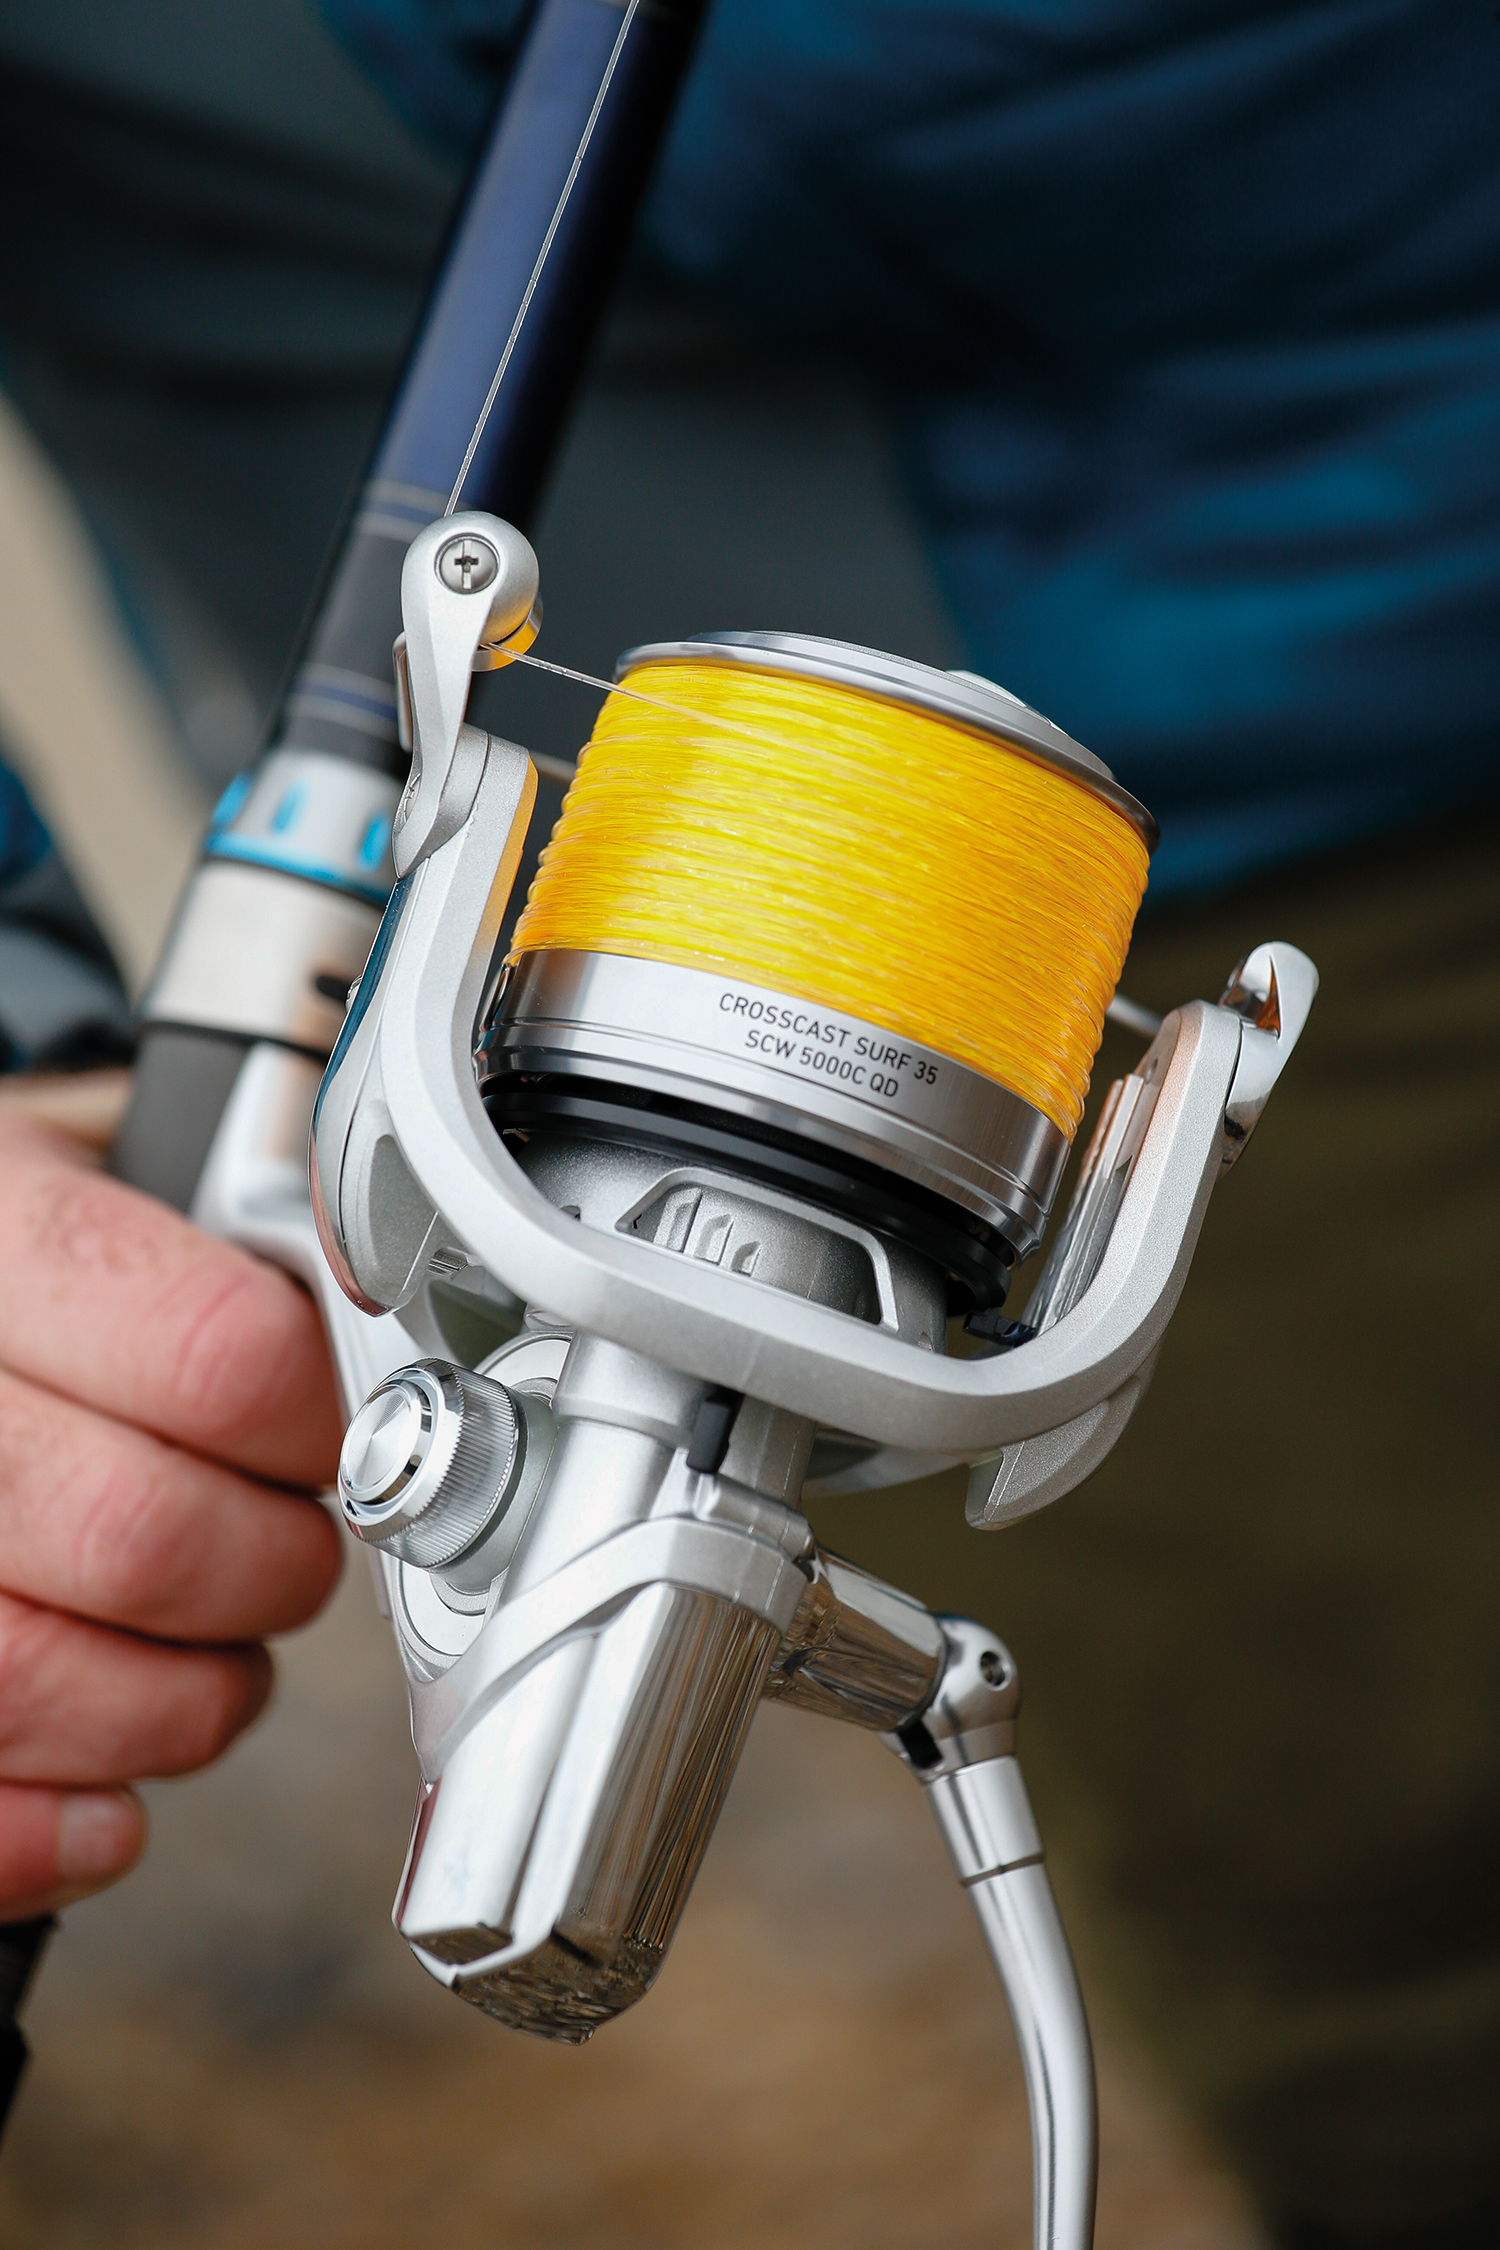 Daiwa 17 CROSSCAST 5000 Spinning Reel for surf fishing from Japan